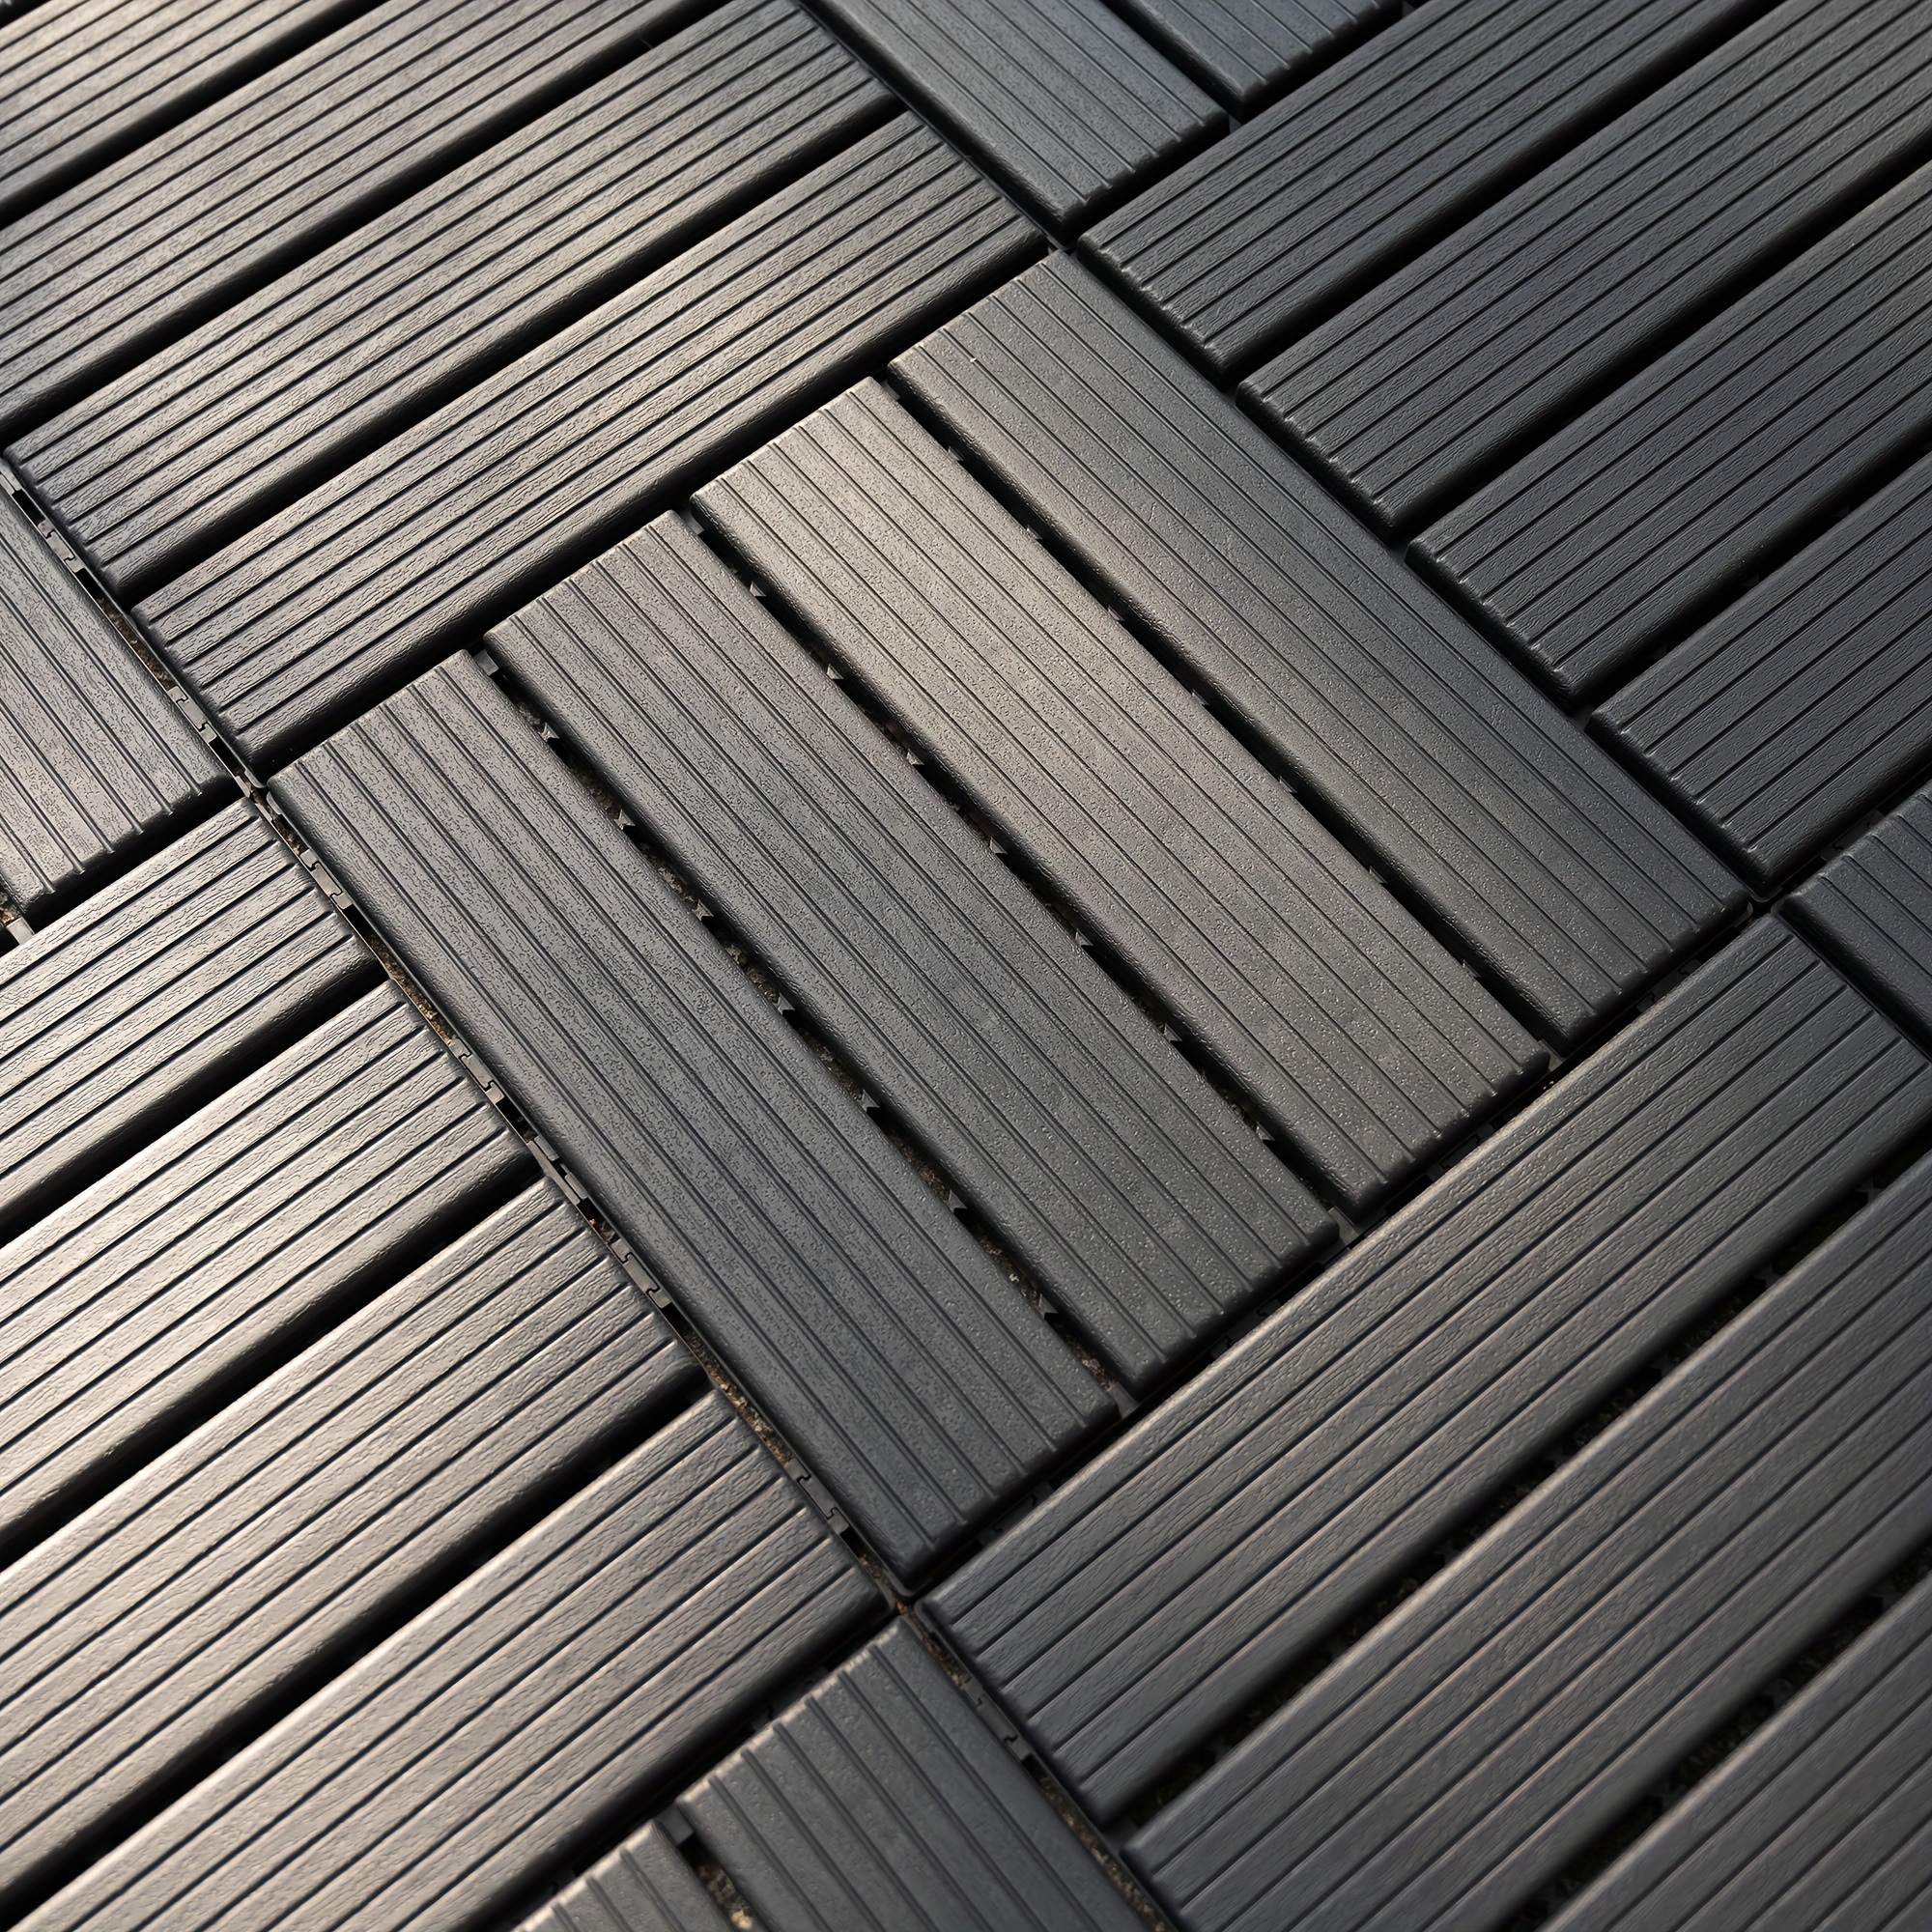 

Plastic Interlocking Deck Tiles, 44 Pack Patio Deck Tiles, 12 "x12" Square Waterproof Outdoor All Weather Use, Pool Side Balcony Backyard Patio Deck Tiles, Gray